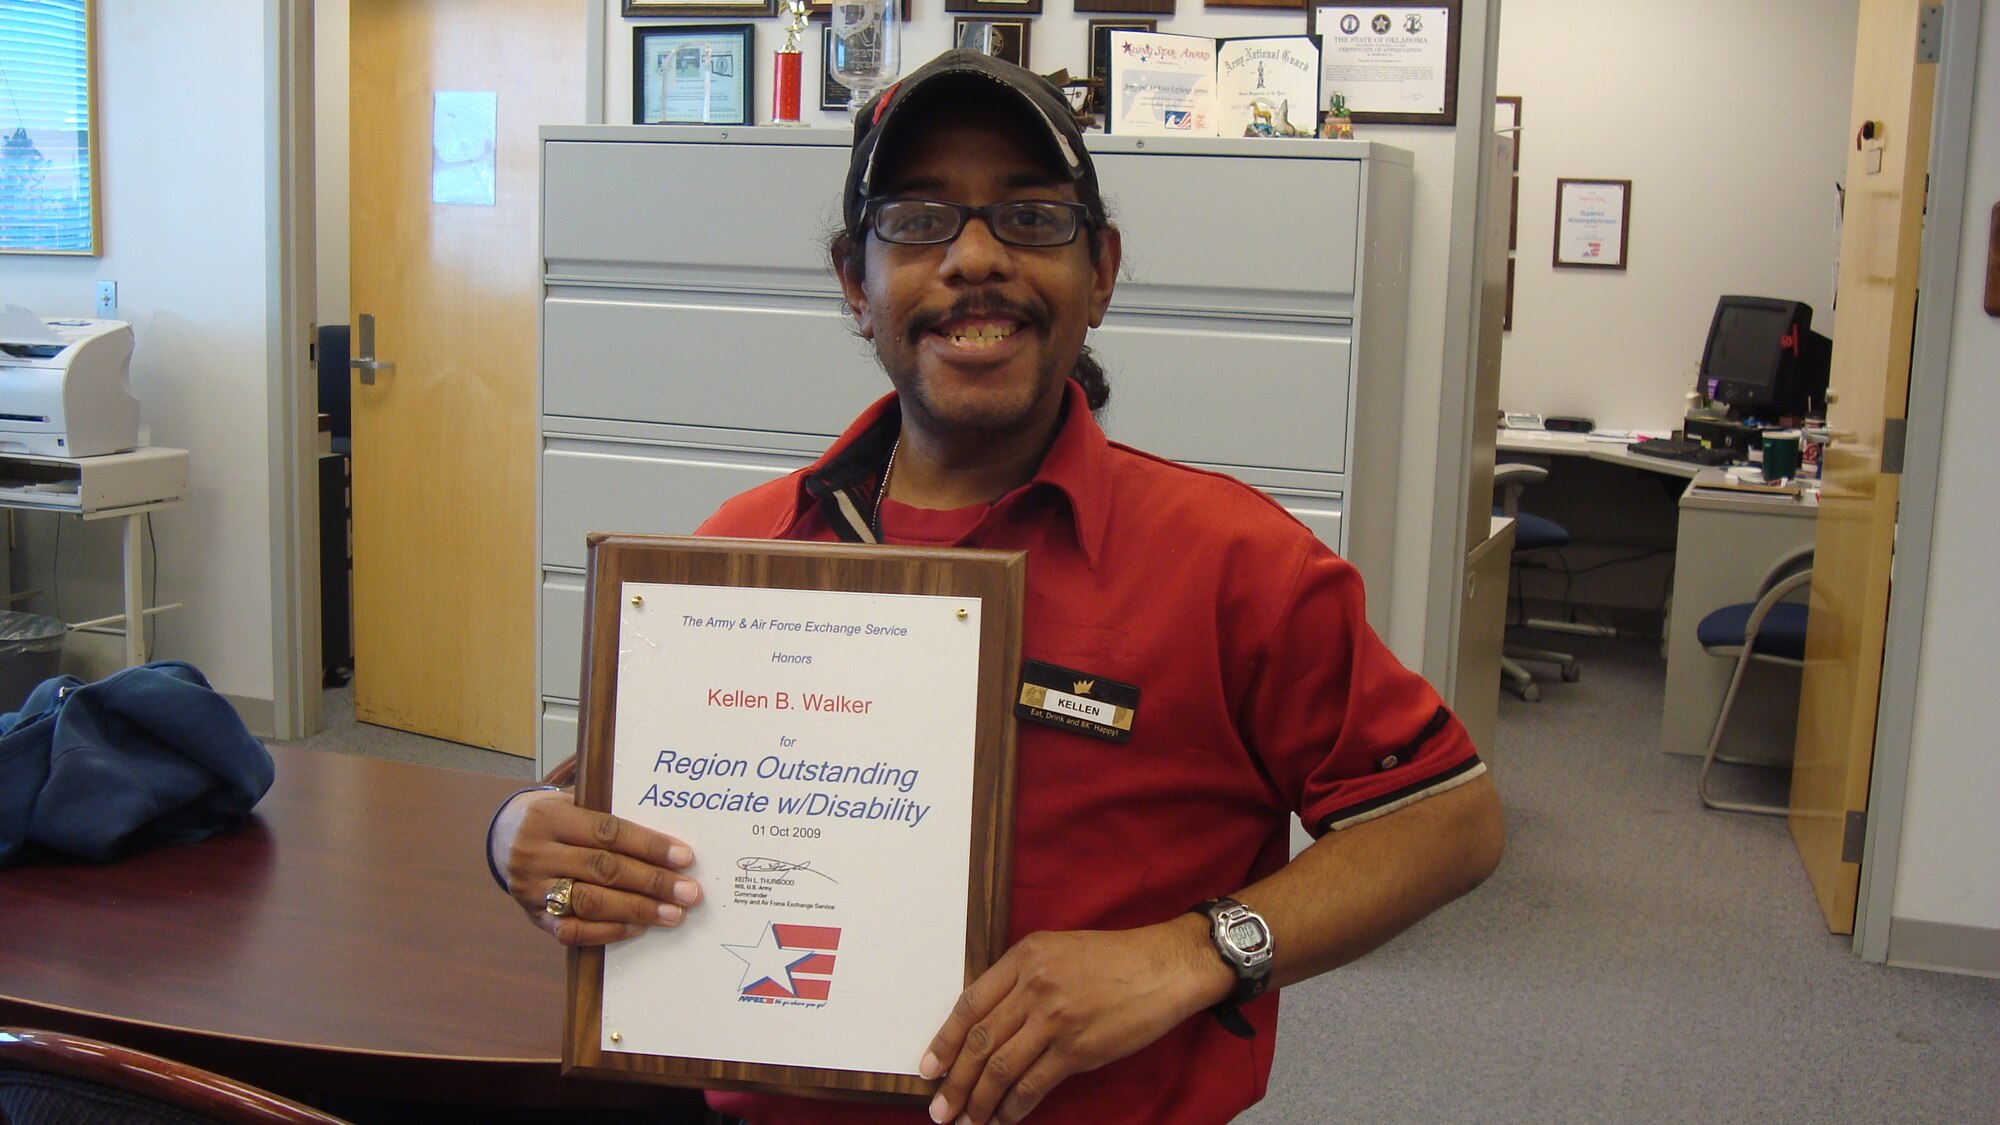 Tinker worker named AAFES Central Region Outstanding Employee with Disability
Kellen Walker was recently named the Army and Air Force Exchange Service’s Outstanding Associate with Disability in the Central Region and came in second worldwide. Kellen has been a food service worker at Burger King since Oct. 27, 2003. His job is to keep the dining room clean and ready for customers. Despite having a disability, Kellen delivers world-class customer service everyday with a big smile and a friendly word. He is the son of retired Air Force Maj. Michael Walker and Brenda Walker. (Courtesy photo)
